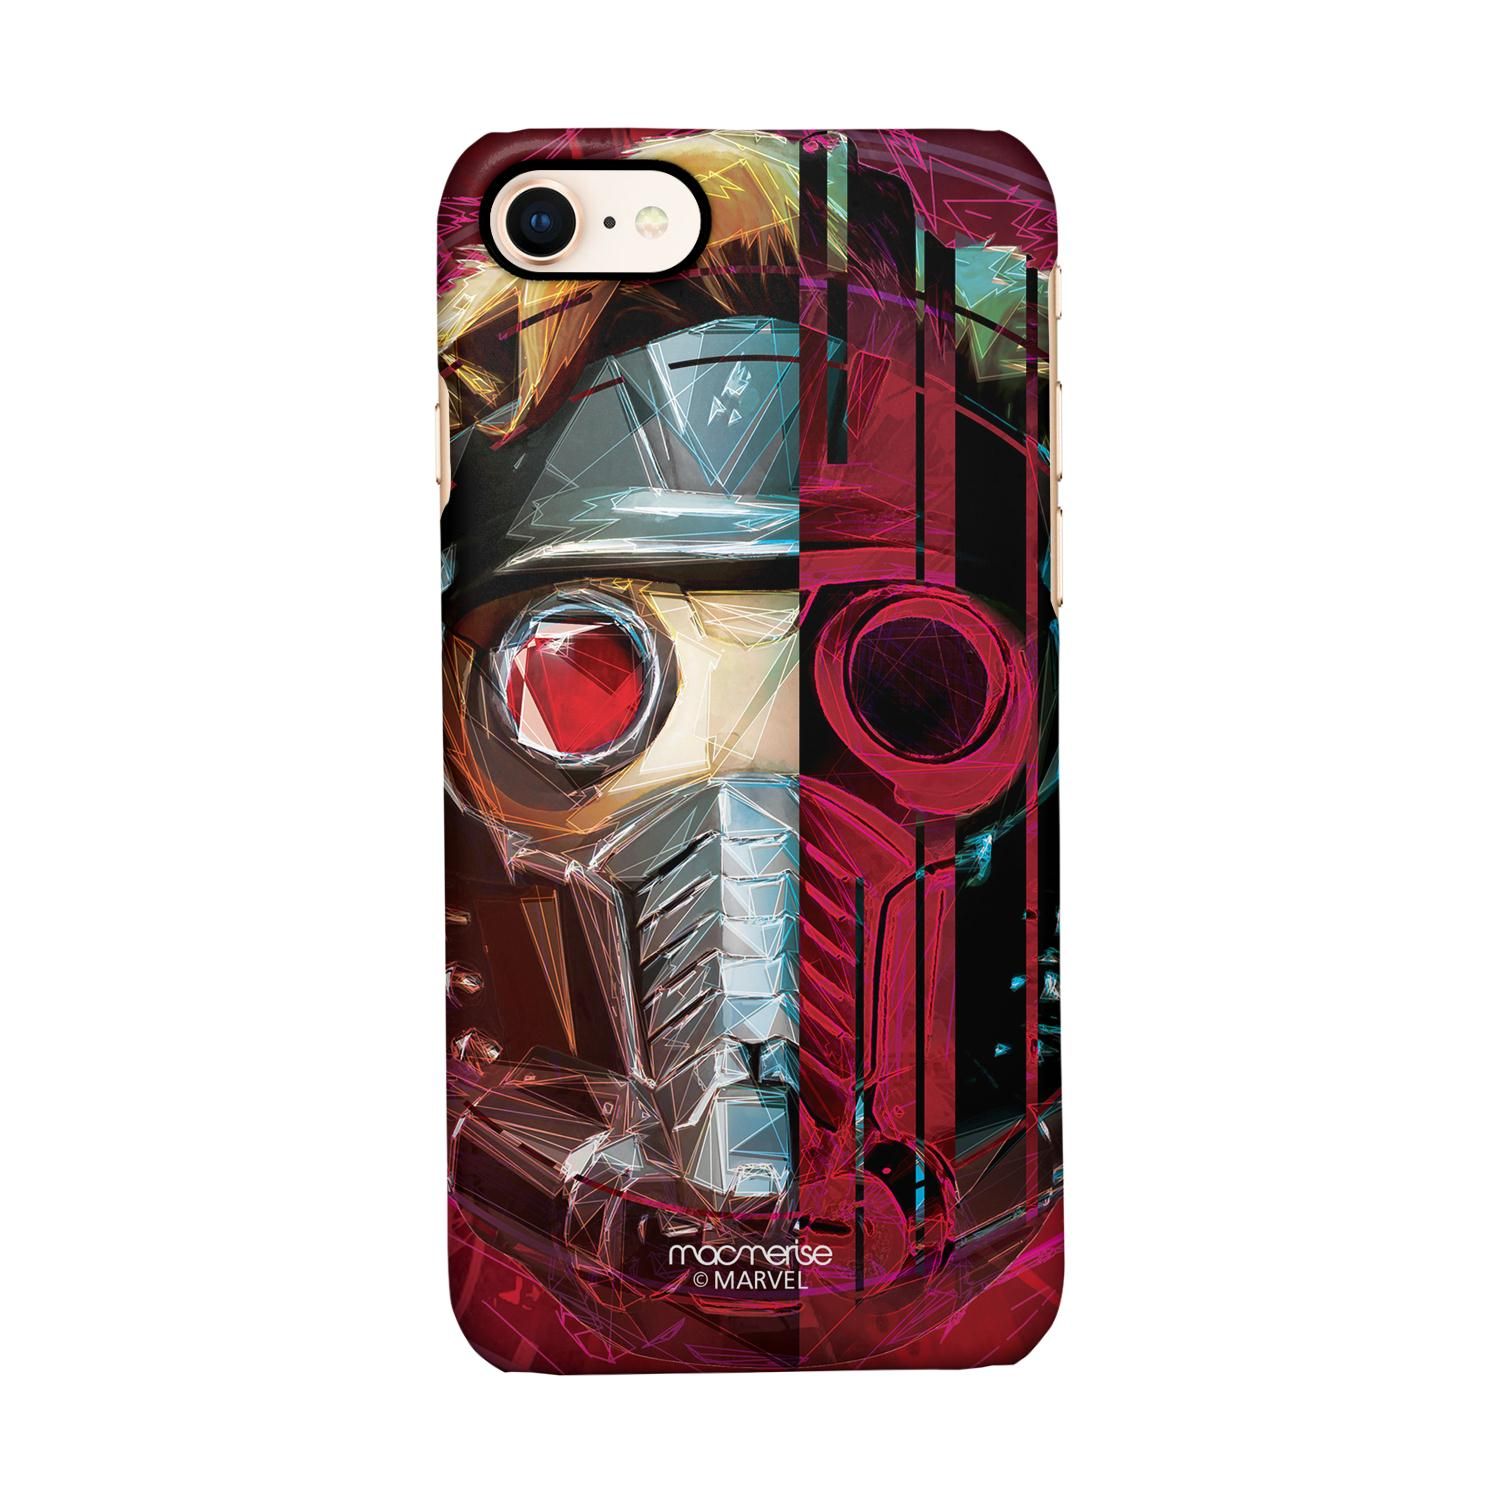 Buy Grunge Suit StarLord - Sleek Phone Case for iPhone 8 Online